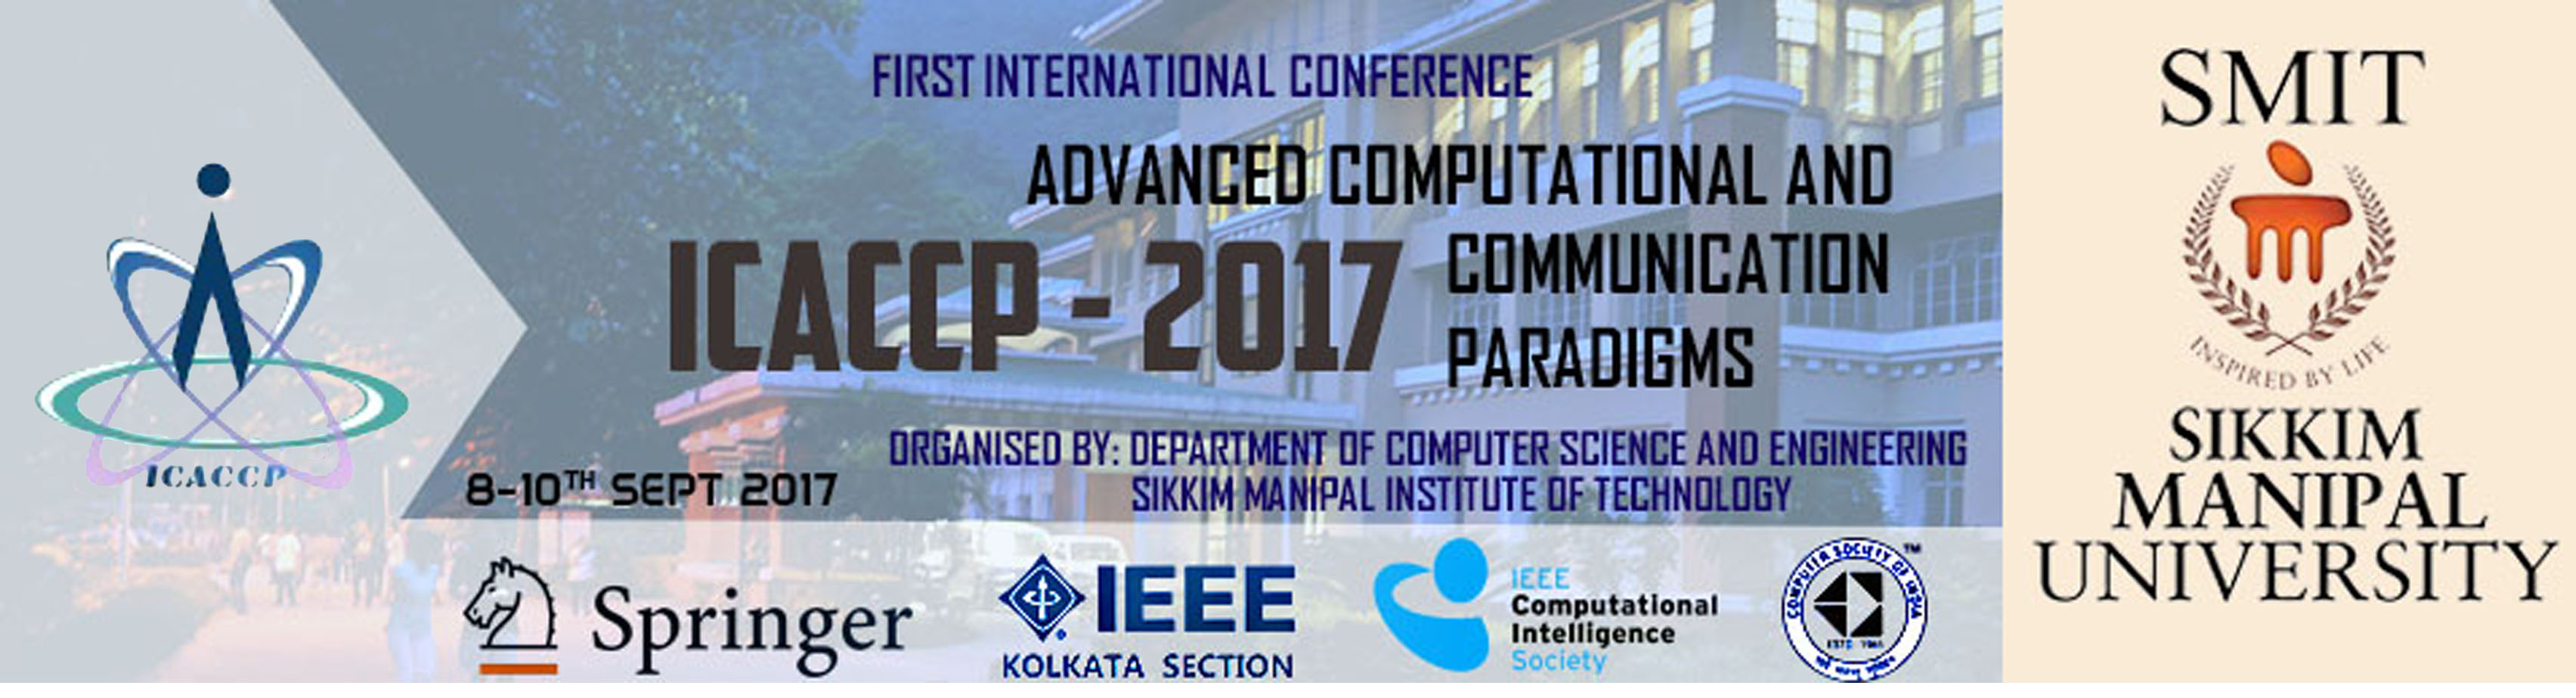 First International Conference on Advanced Computational and Communication Paradigms ICACCP 2017